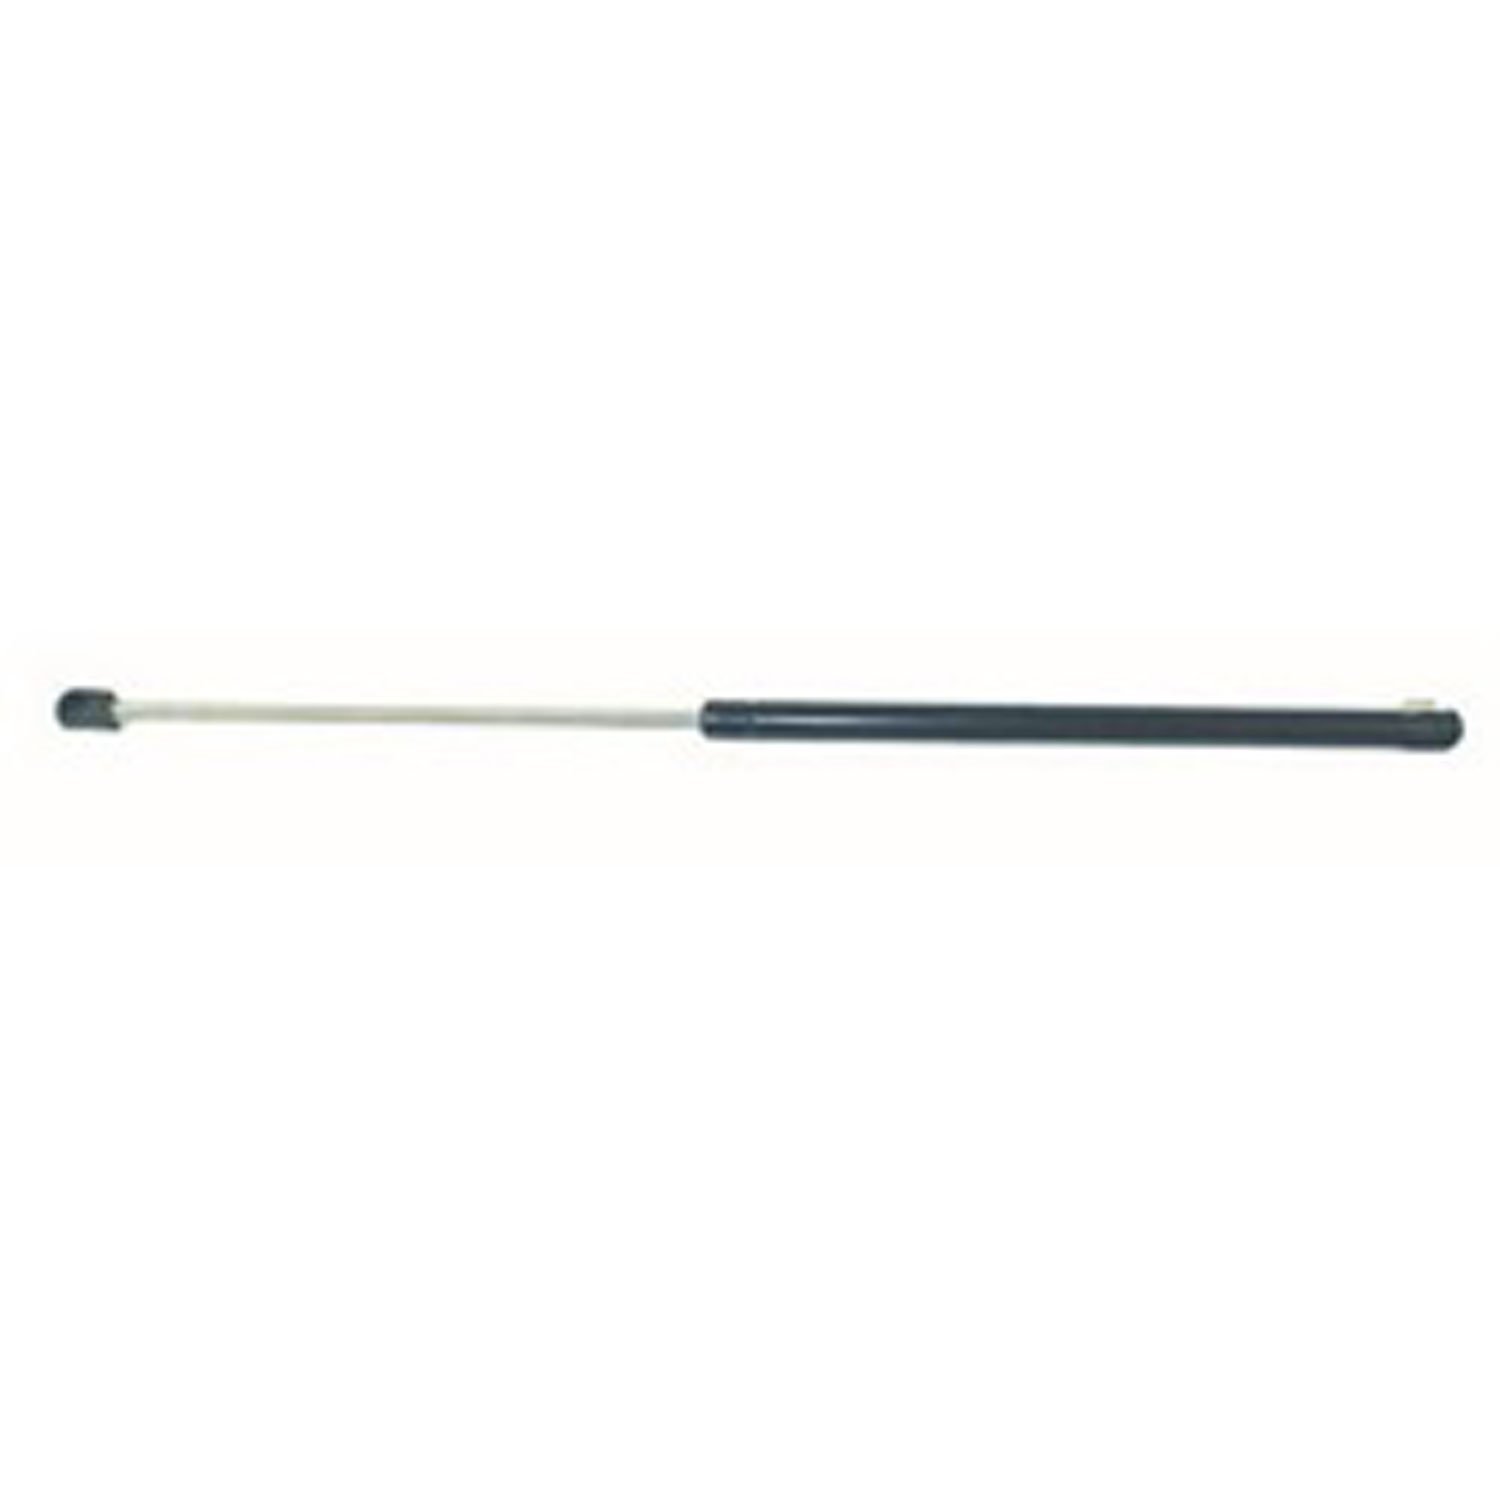 Replacement gas strut from Omix-ADA, Fits hardtop liftgate on 87-95 Jeep Wrangler YJ Will fit left or right side.